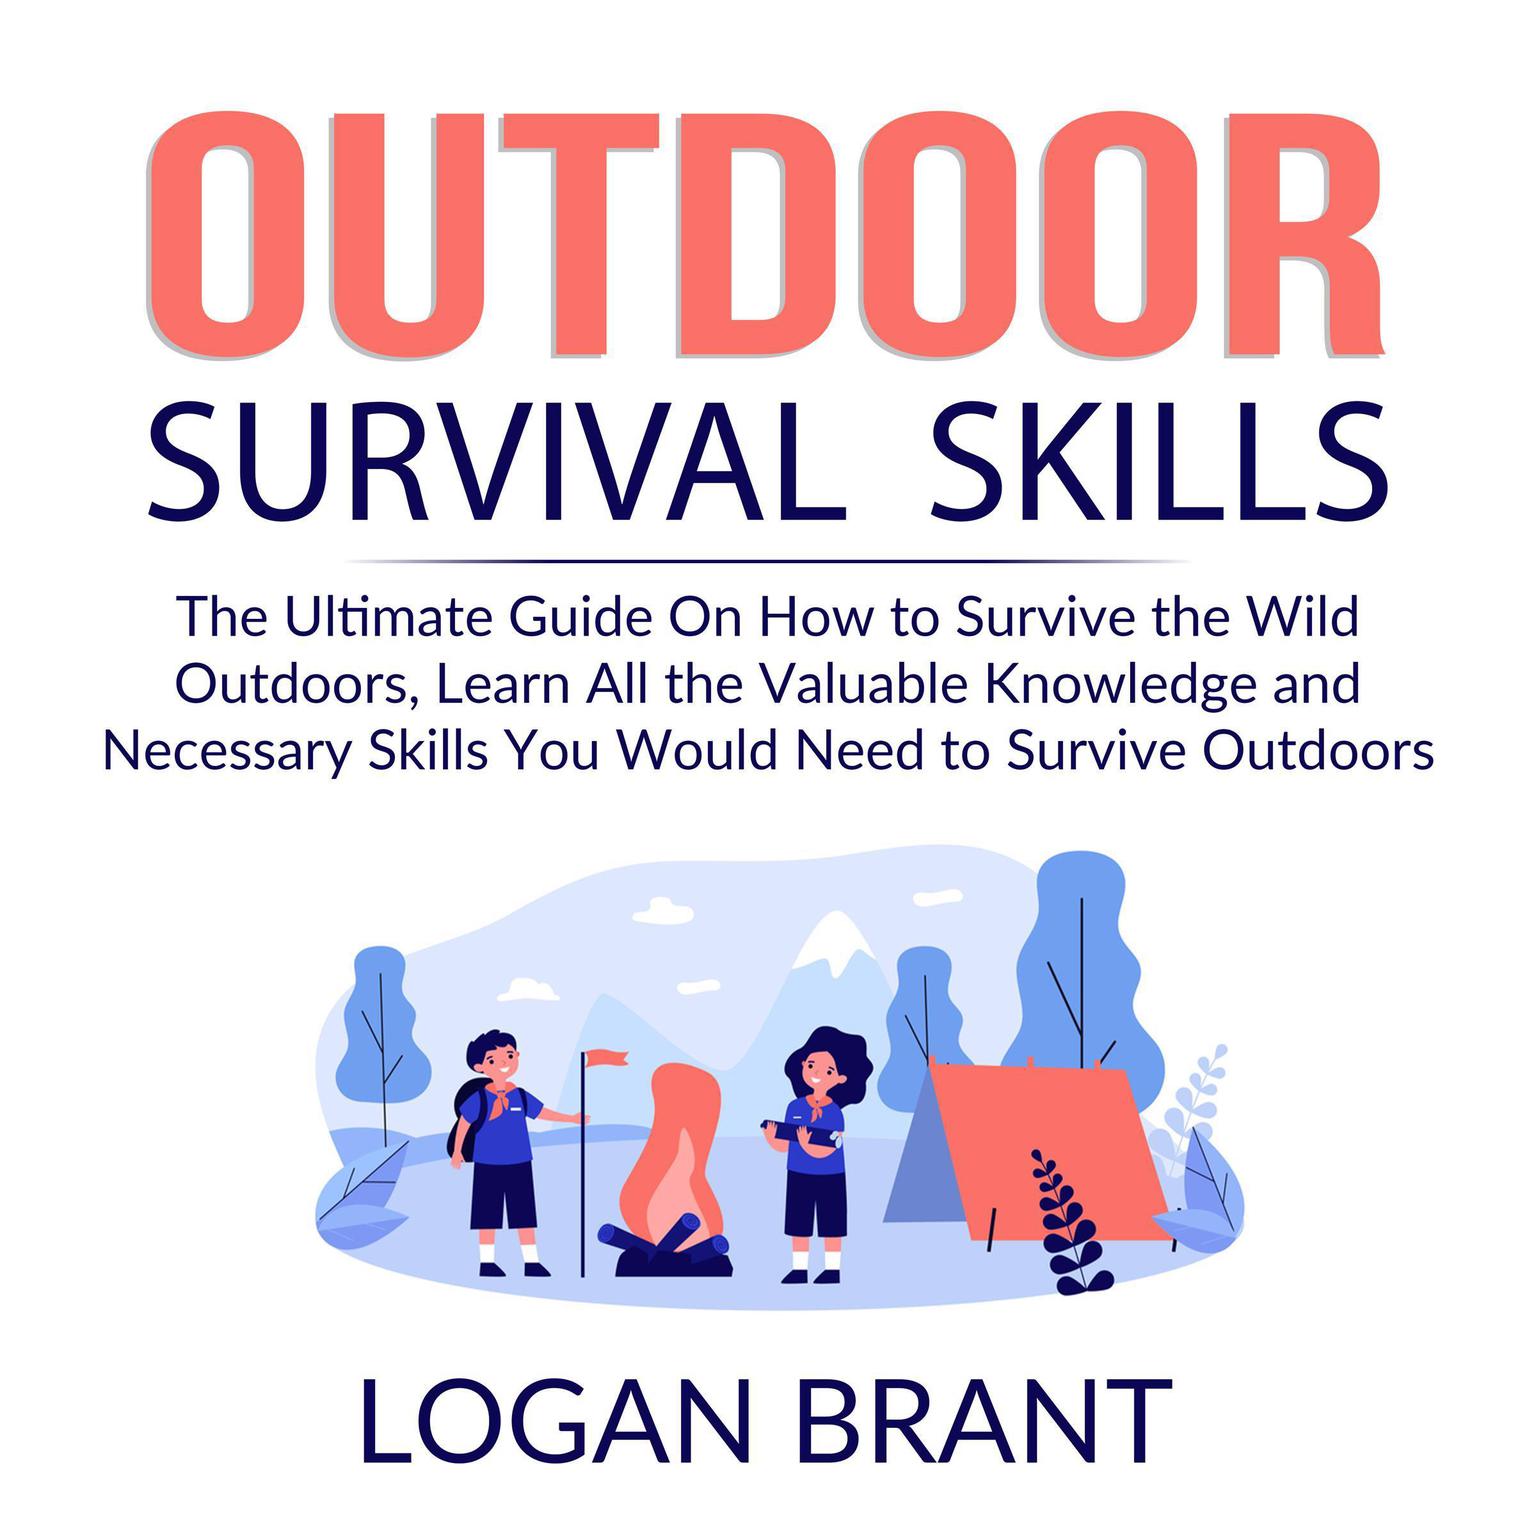 Outdoor Survival Skills: The Ultimate Guide On How to Survive the Wild Outdoors, Learn All the Valuable Knowledge and Necessary Skills You Would Need to Survive Outdoors Audiobook, by Logan Brant